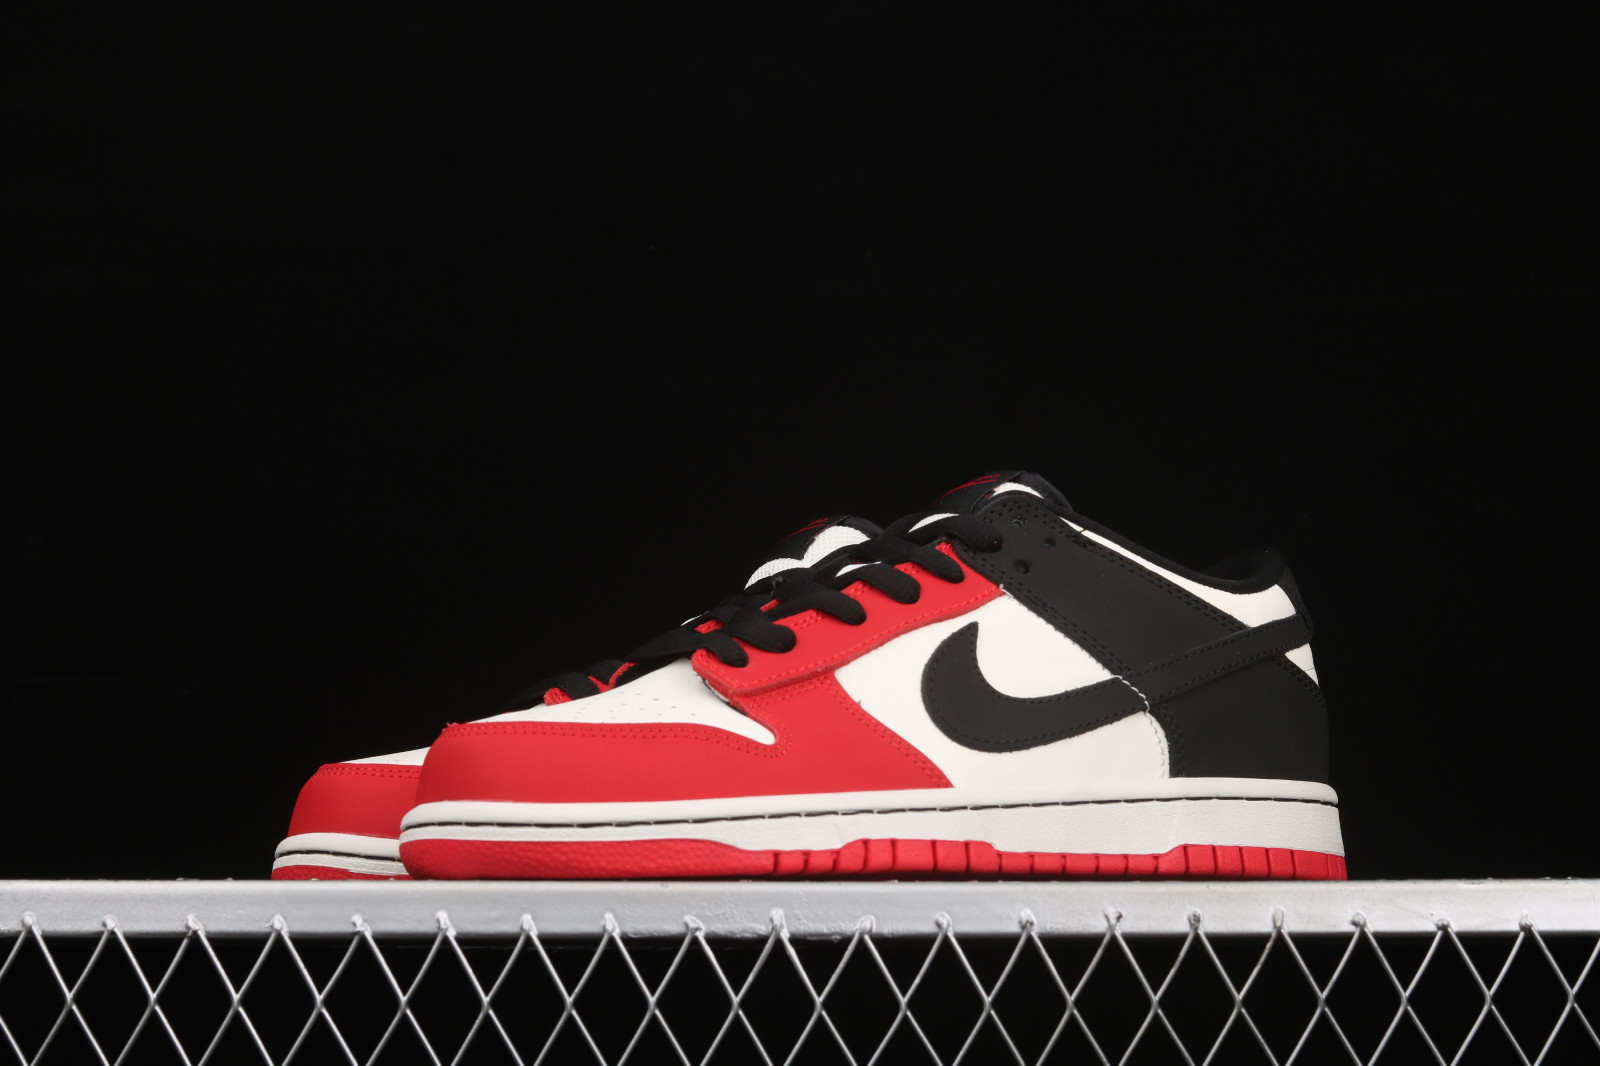 Ciudad Hecho un desastre Honestidad GmarShops - Nike SB Dunk Low University Red White Black Shoes 854866 - 020  - how to avoid buying fake nike sneakers shoes